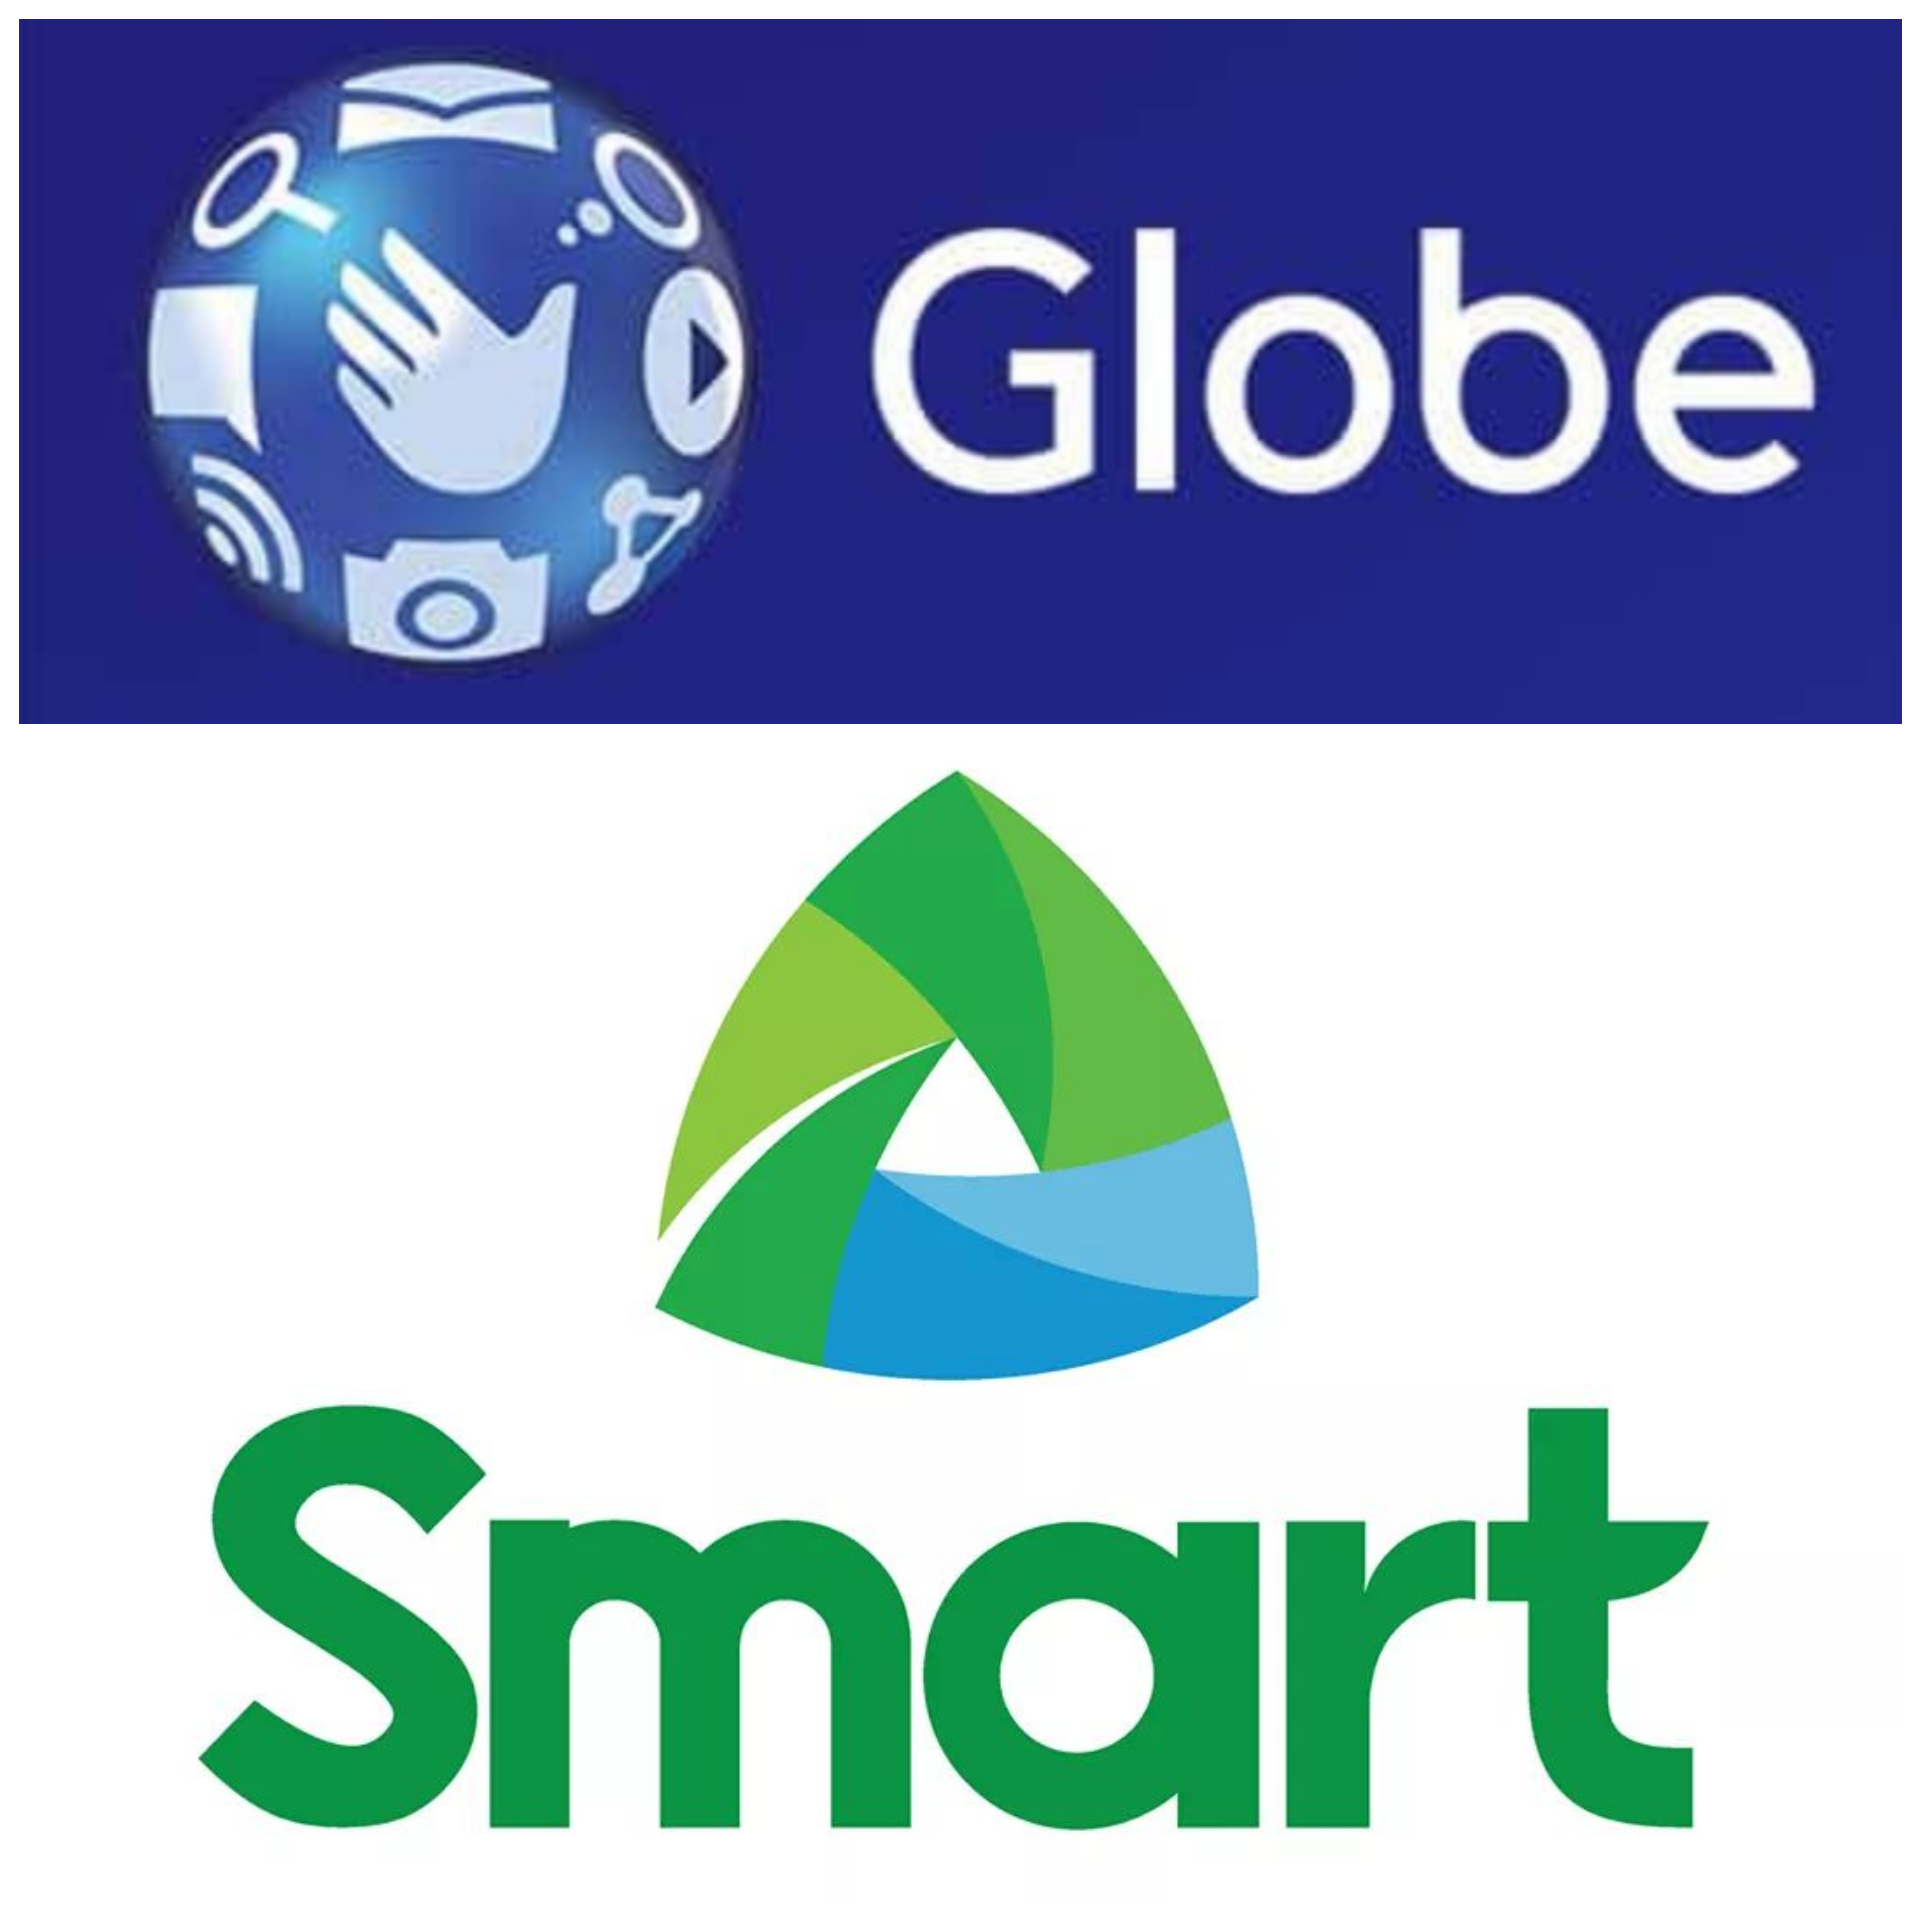 Duterte to Smart, Globe: Improve services by December or else